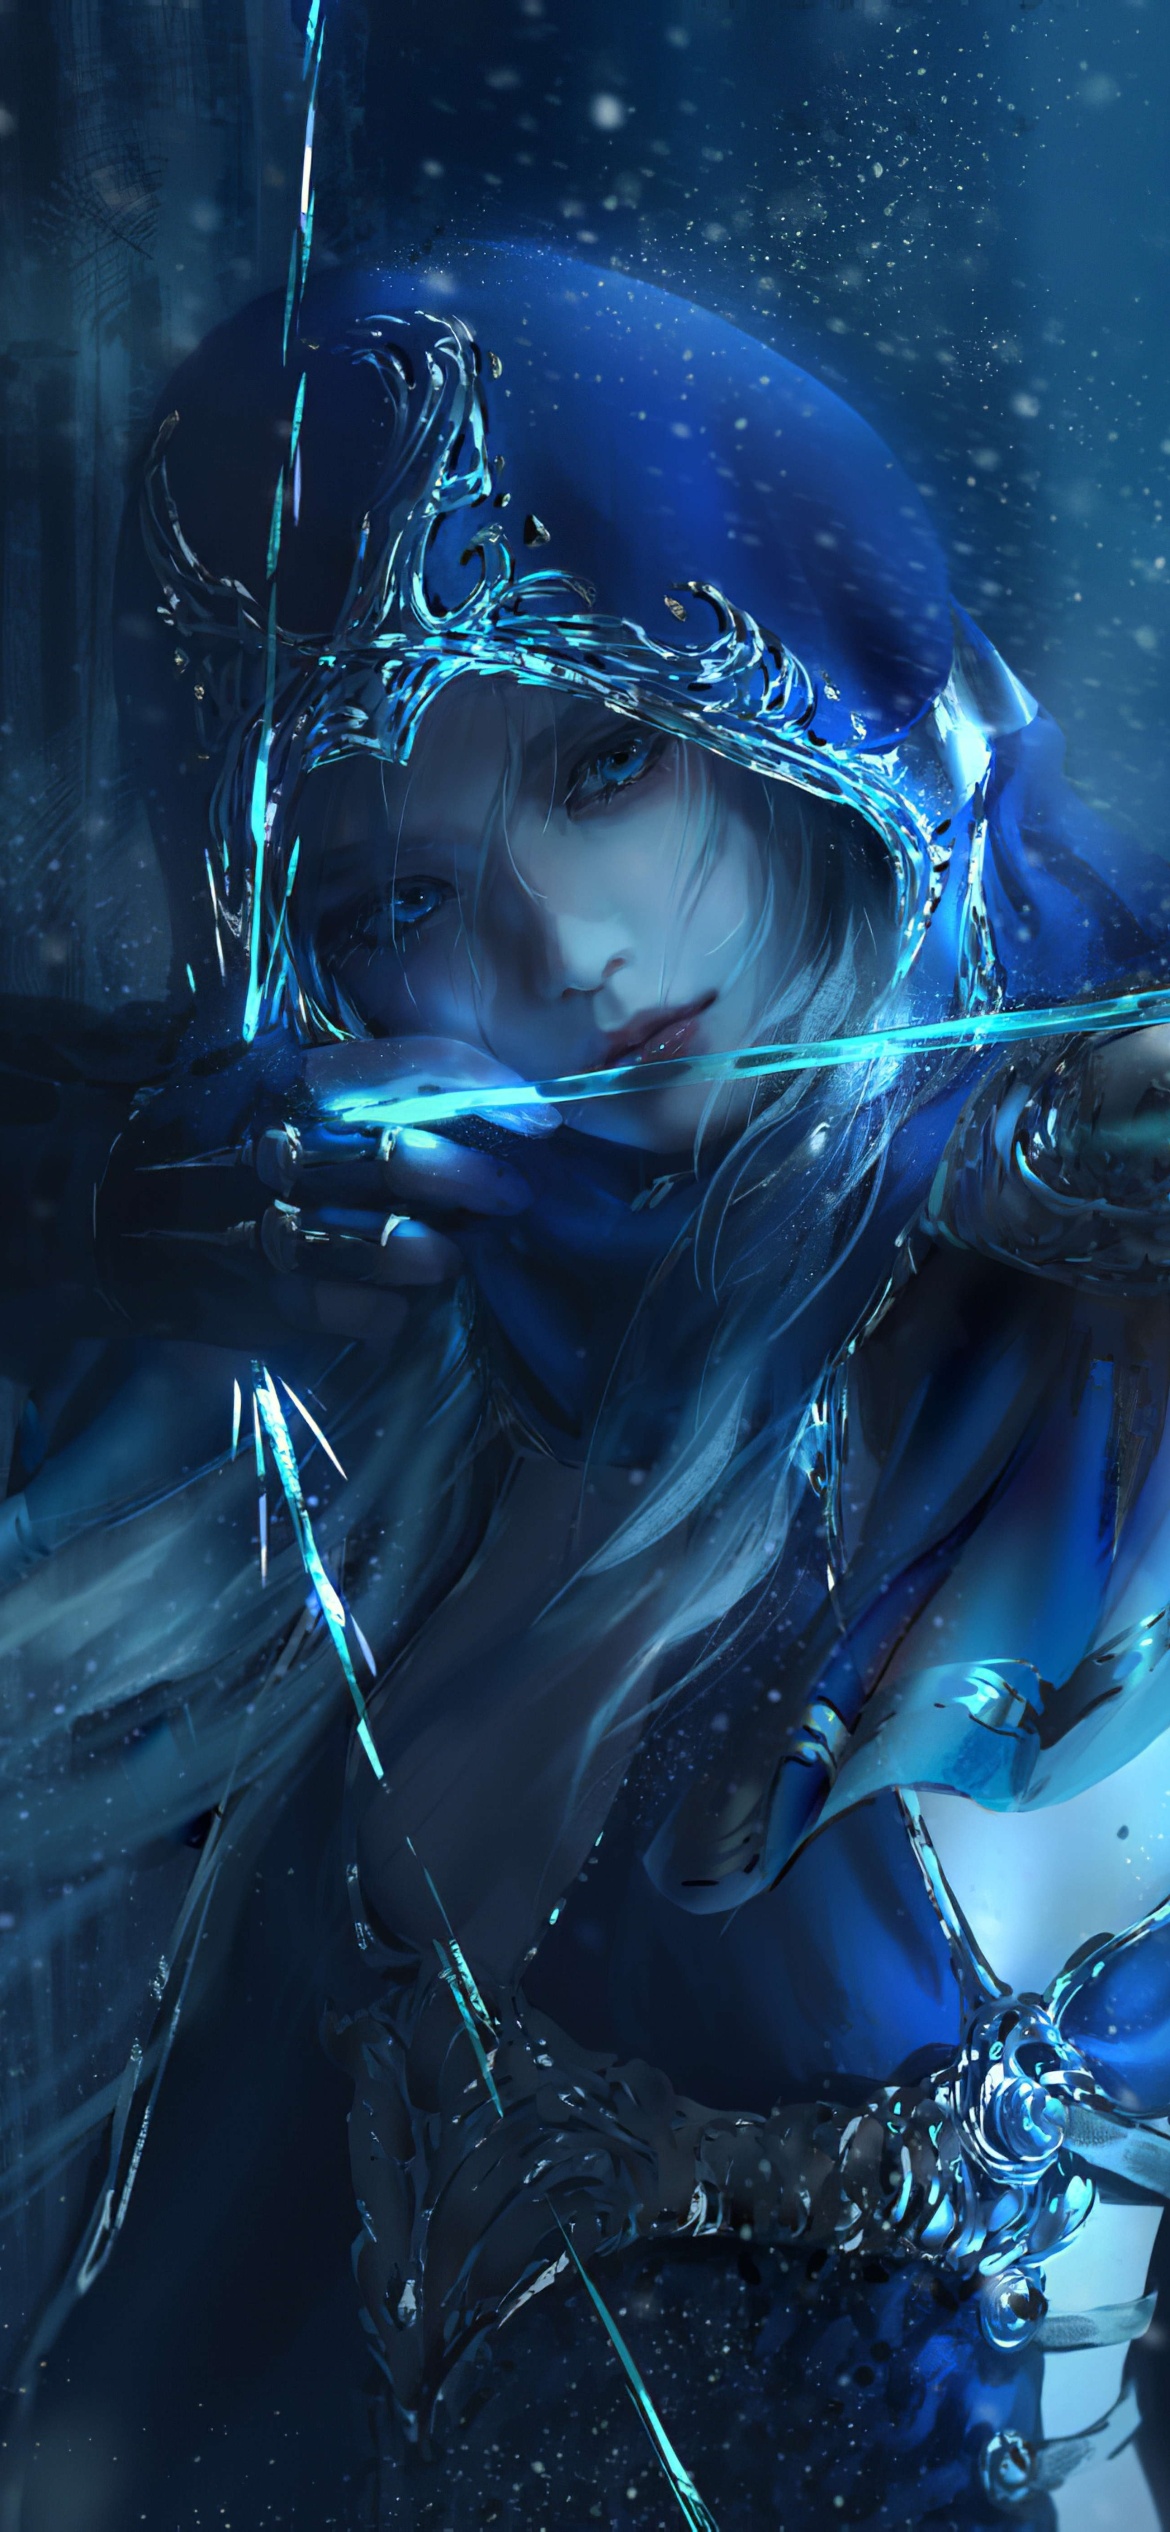 Mobile wallpapers, League of Legends, Gaming, Free backgrounds, 1170x2540 HD Phone